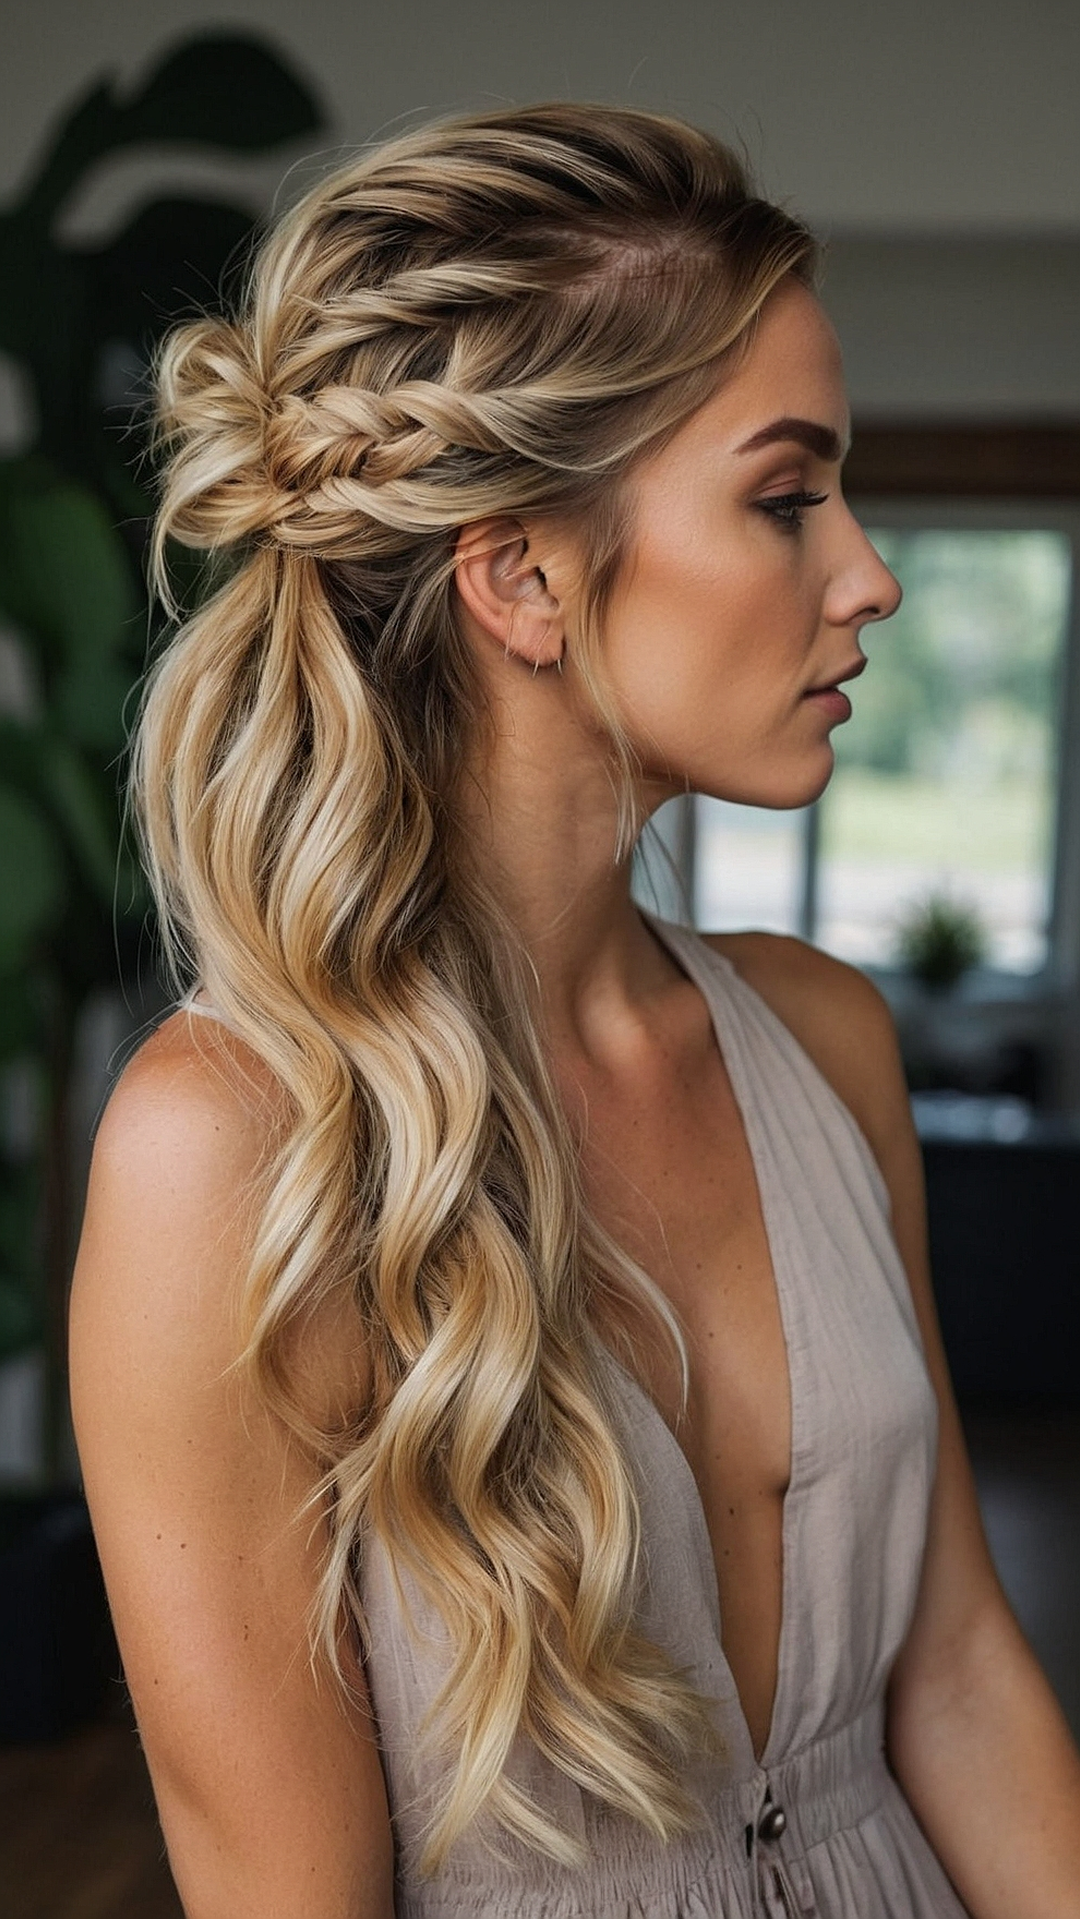 Seaside Chic Hairstyles